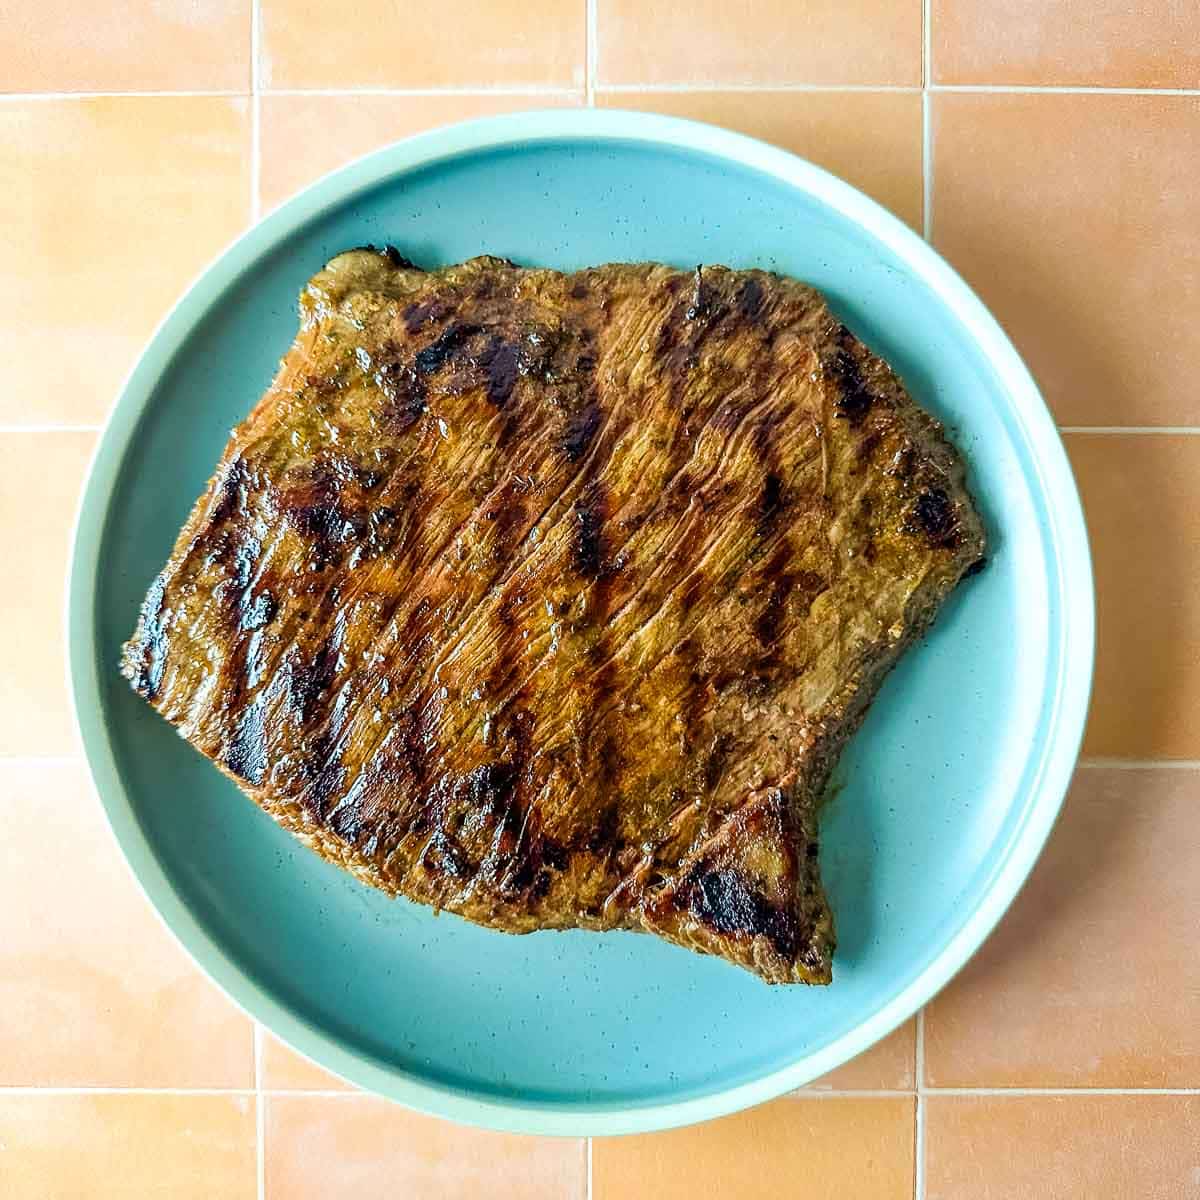 A grilled steak sits on a light blue plate.